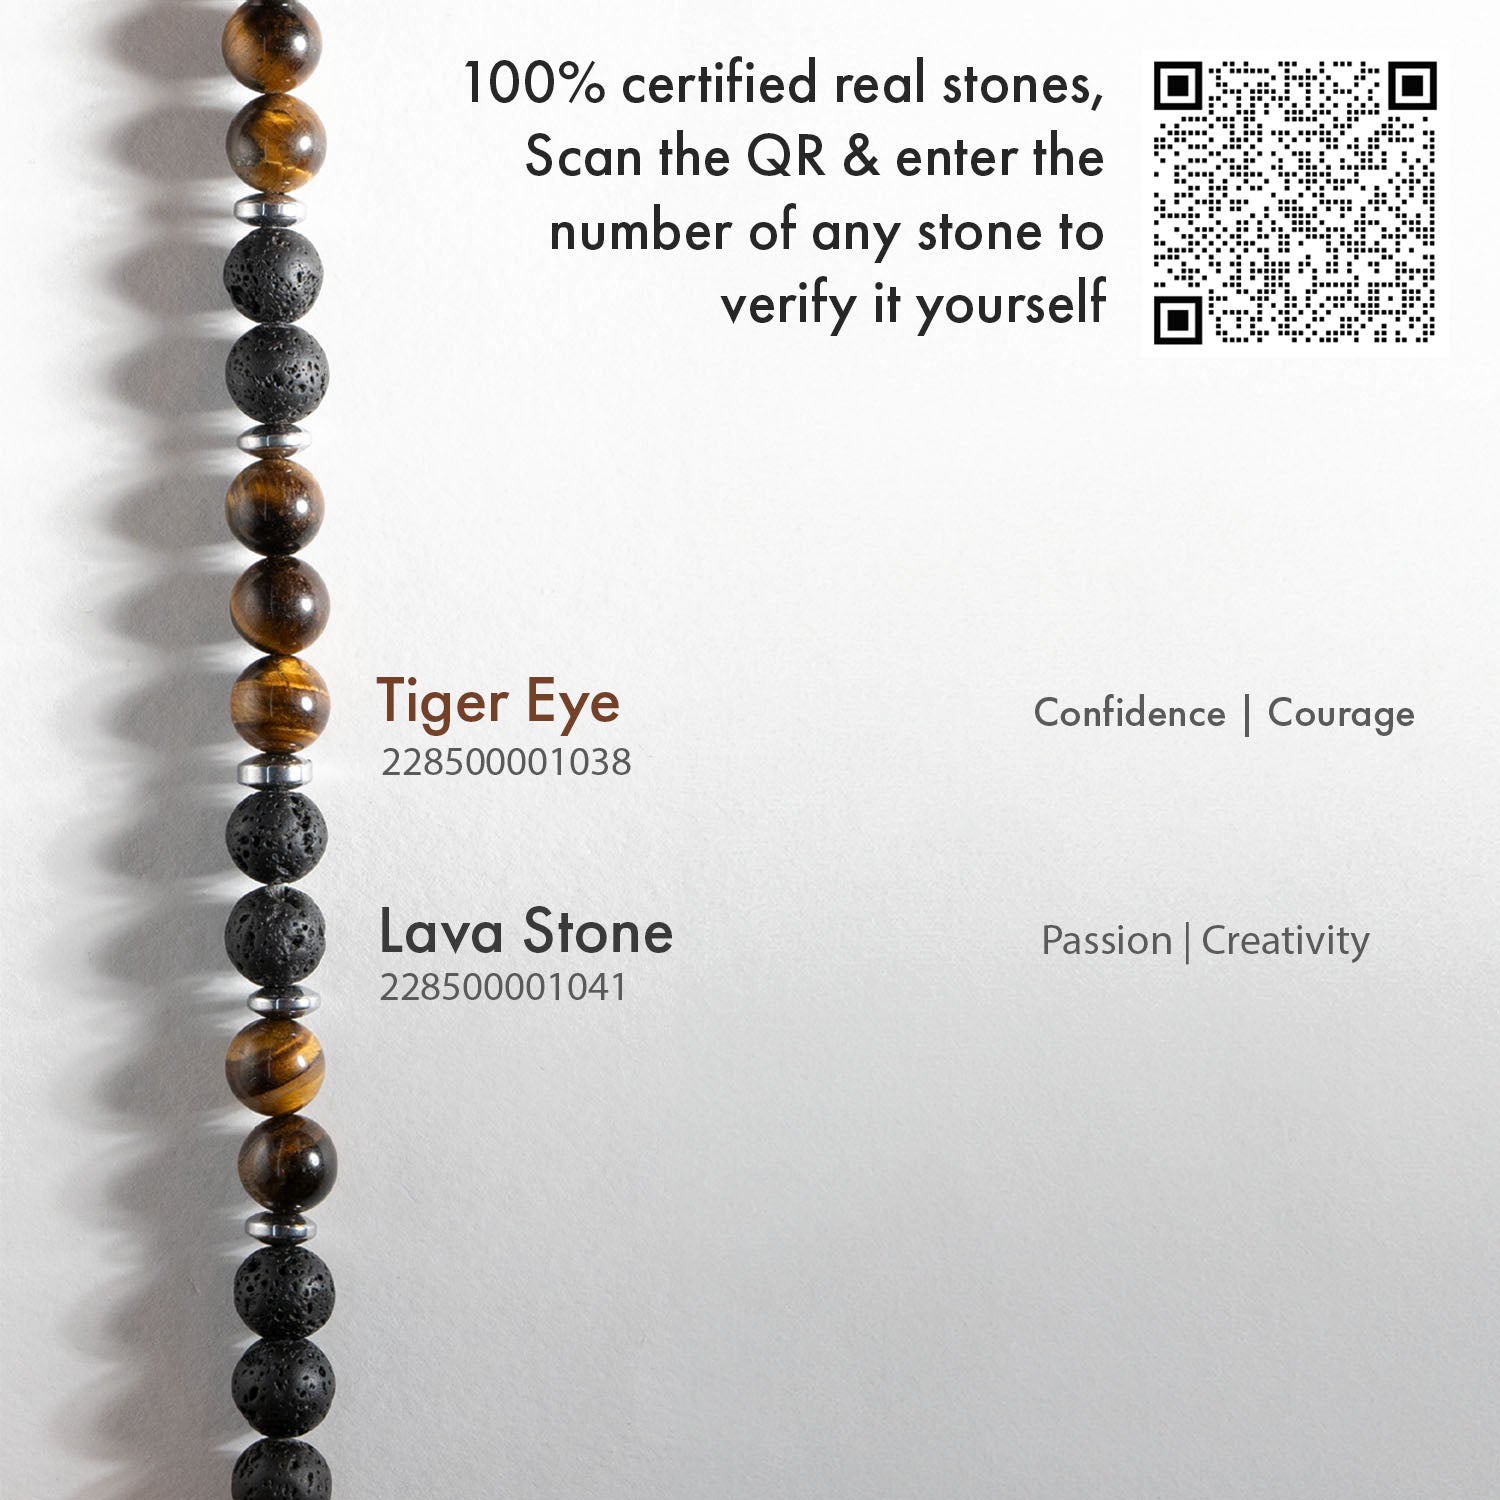 Buy Crystu Tiger Eye Bracelet, Tiger Eye Bracelet Original, Tiger Eye  Bracelet 12 mm, Tiger Eye Bracelet for Courage, Protector and Will Power at  Amazon.in